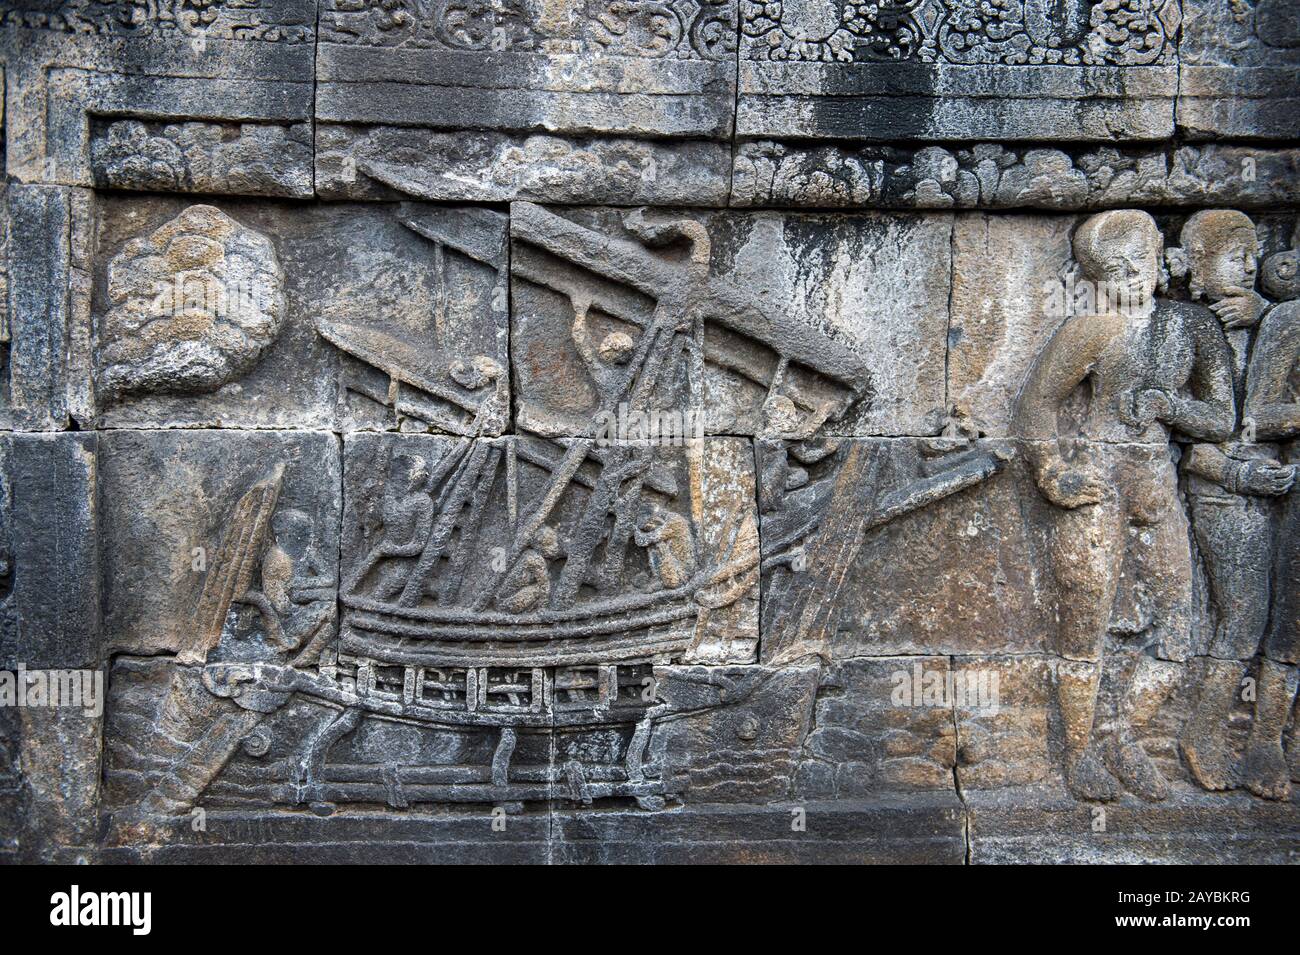 Buddhist in of temple - (UNESCO Heritage Stock Borobudur Photo the world at Magelang largest Alamy in A a the ship ninth-century), carving bas temple Site, relief World